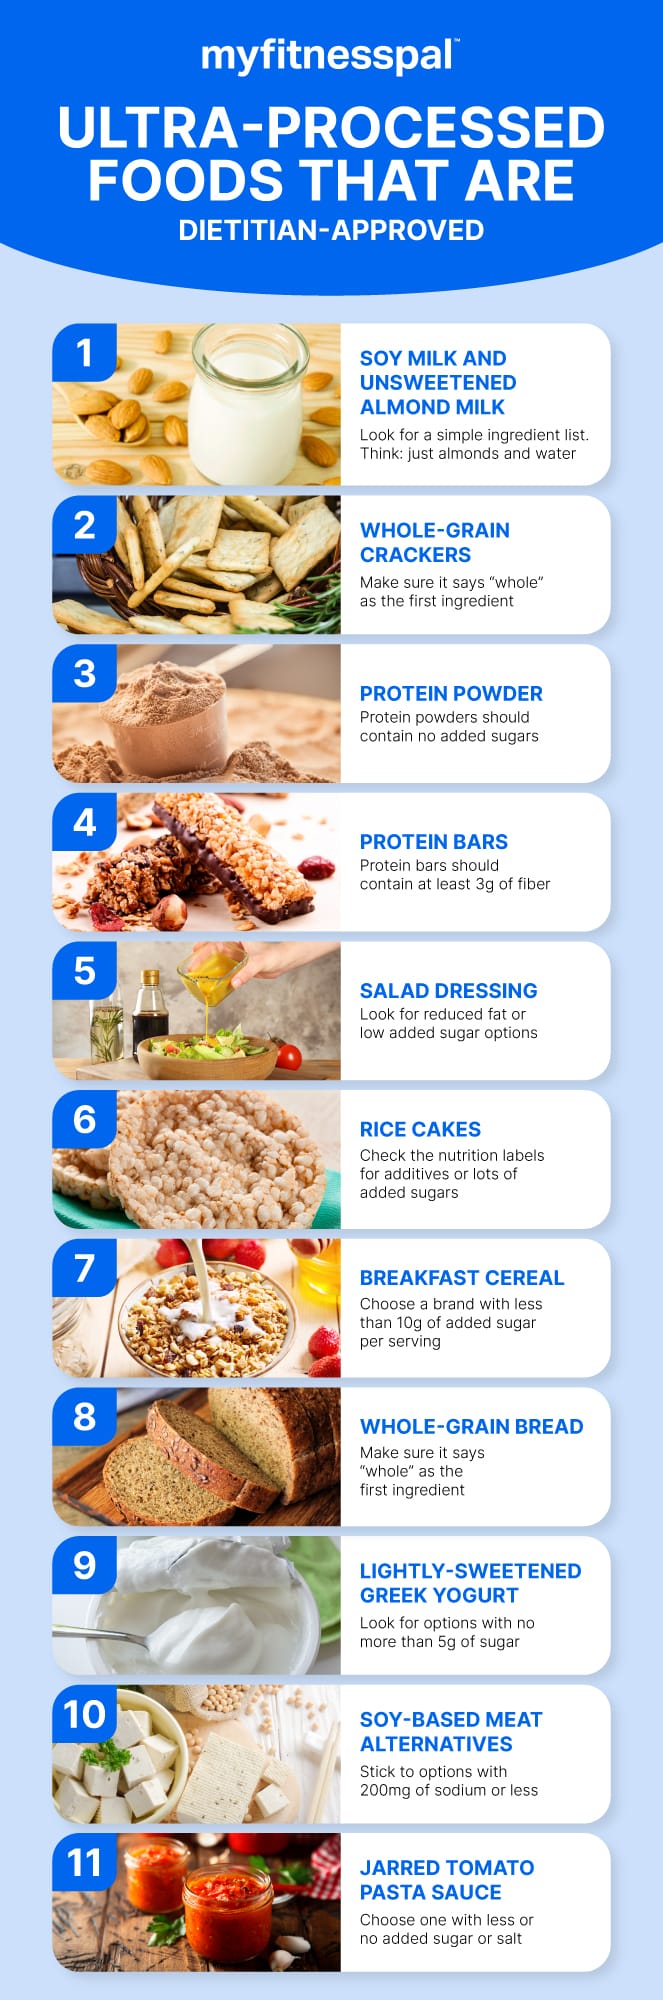 Processed foods dietitian's recommend (INFOGRAPHIC)